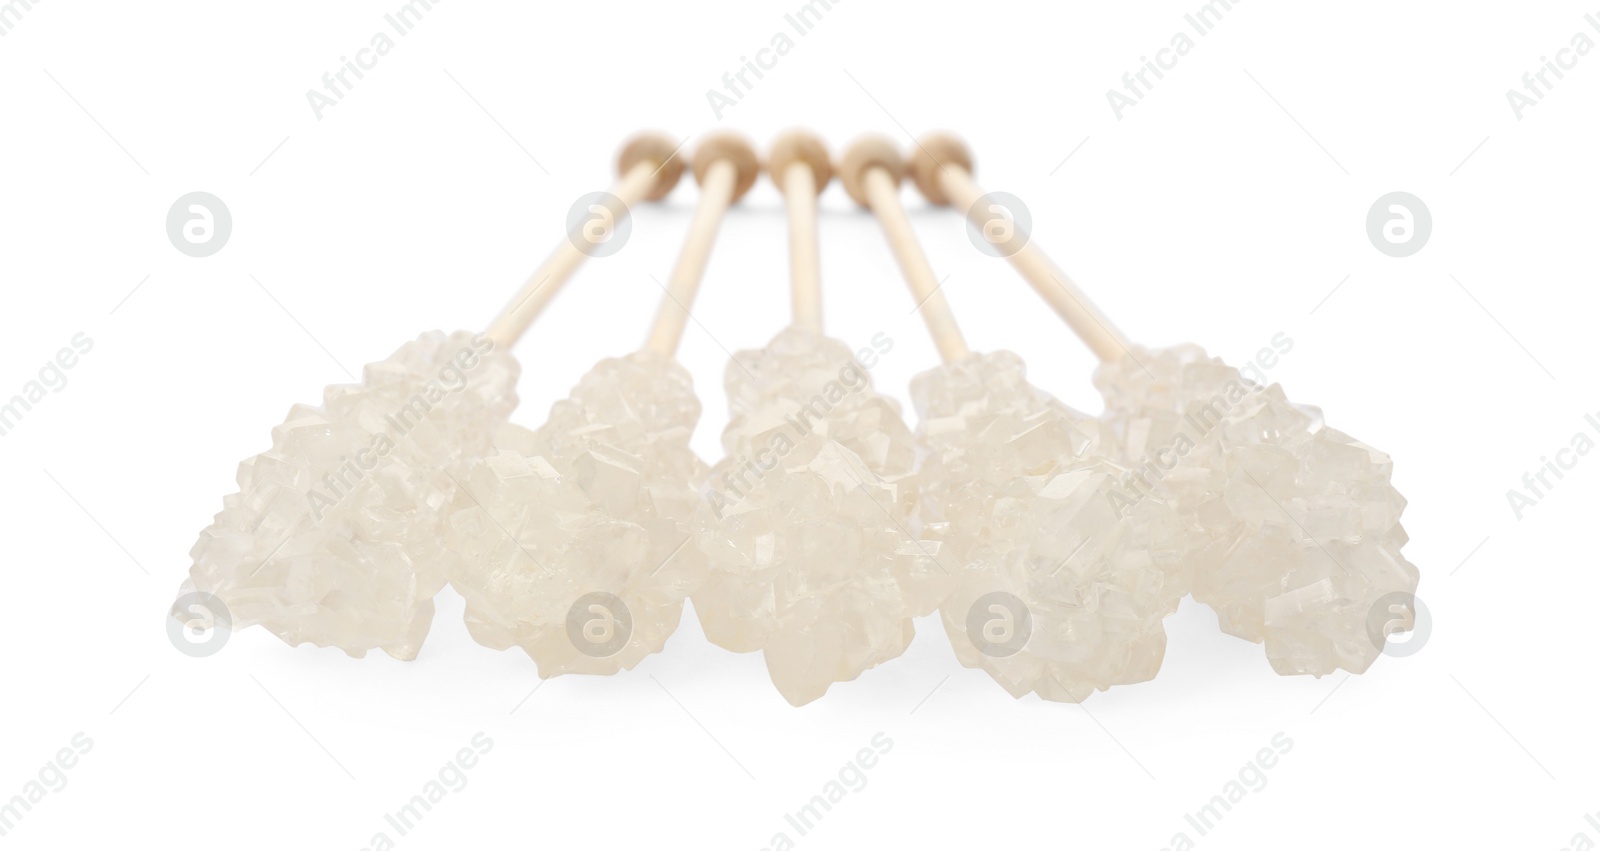 Photo of Wooden sticks with sugar crystals isolated on white. Tasty rock candies